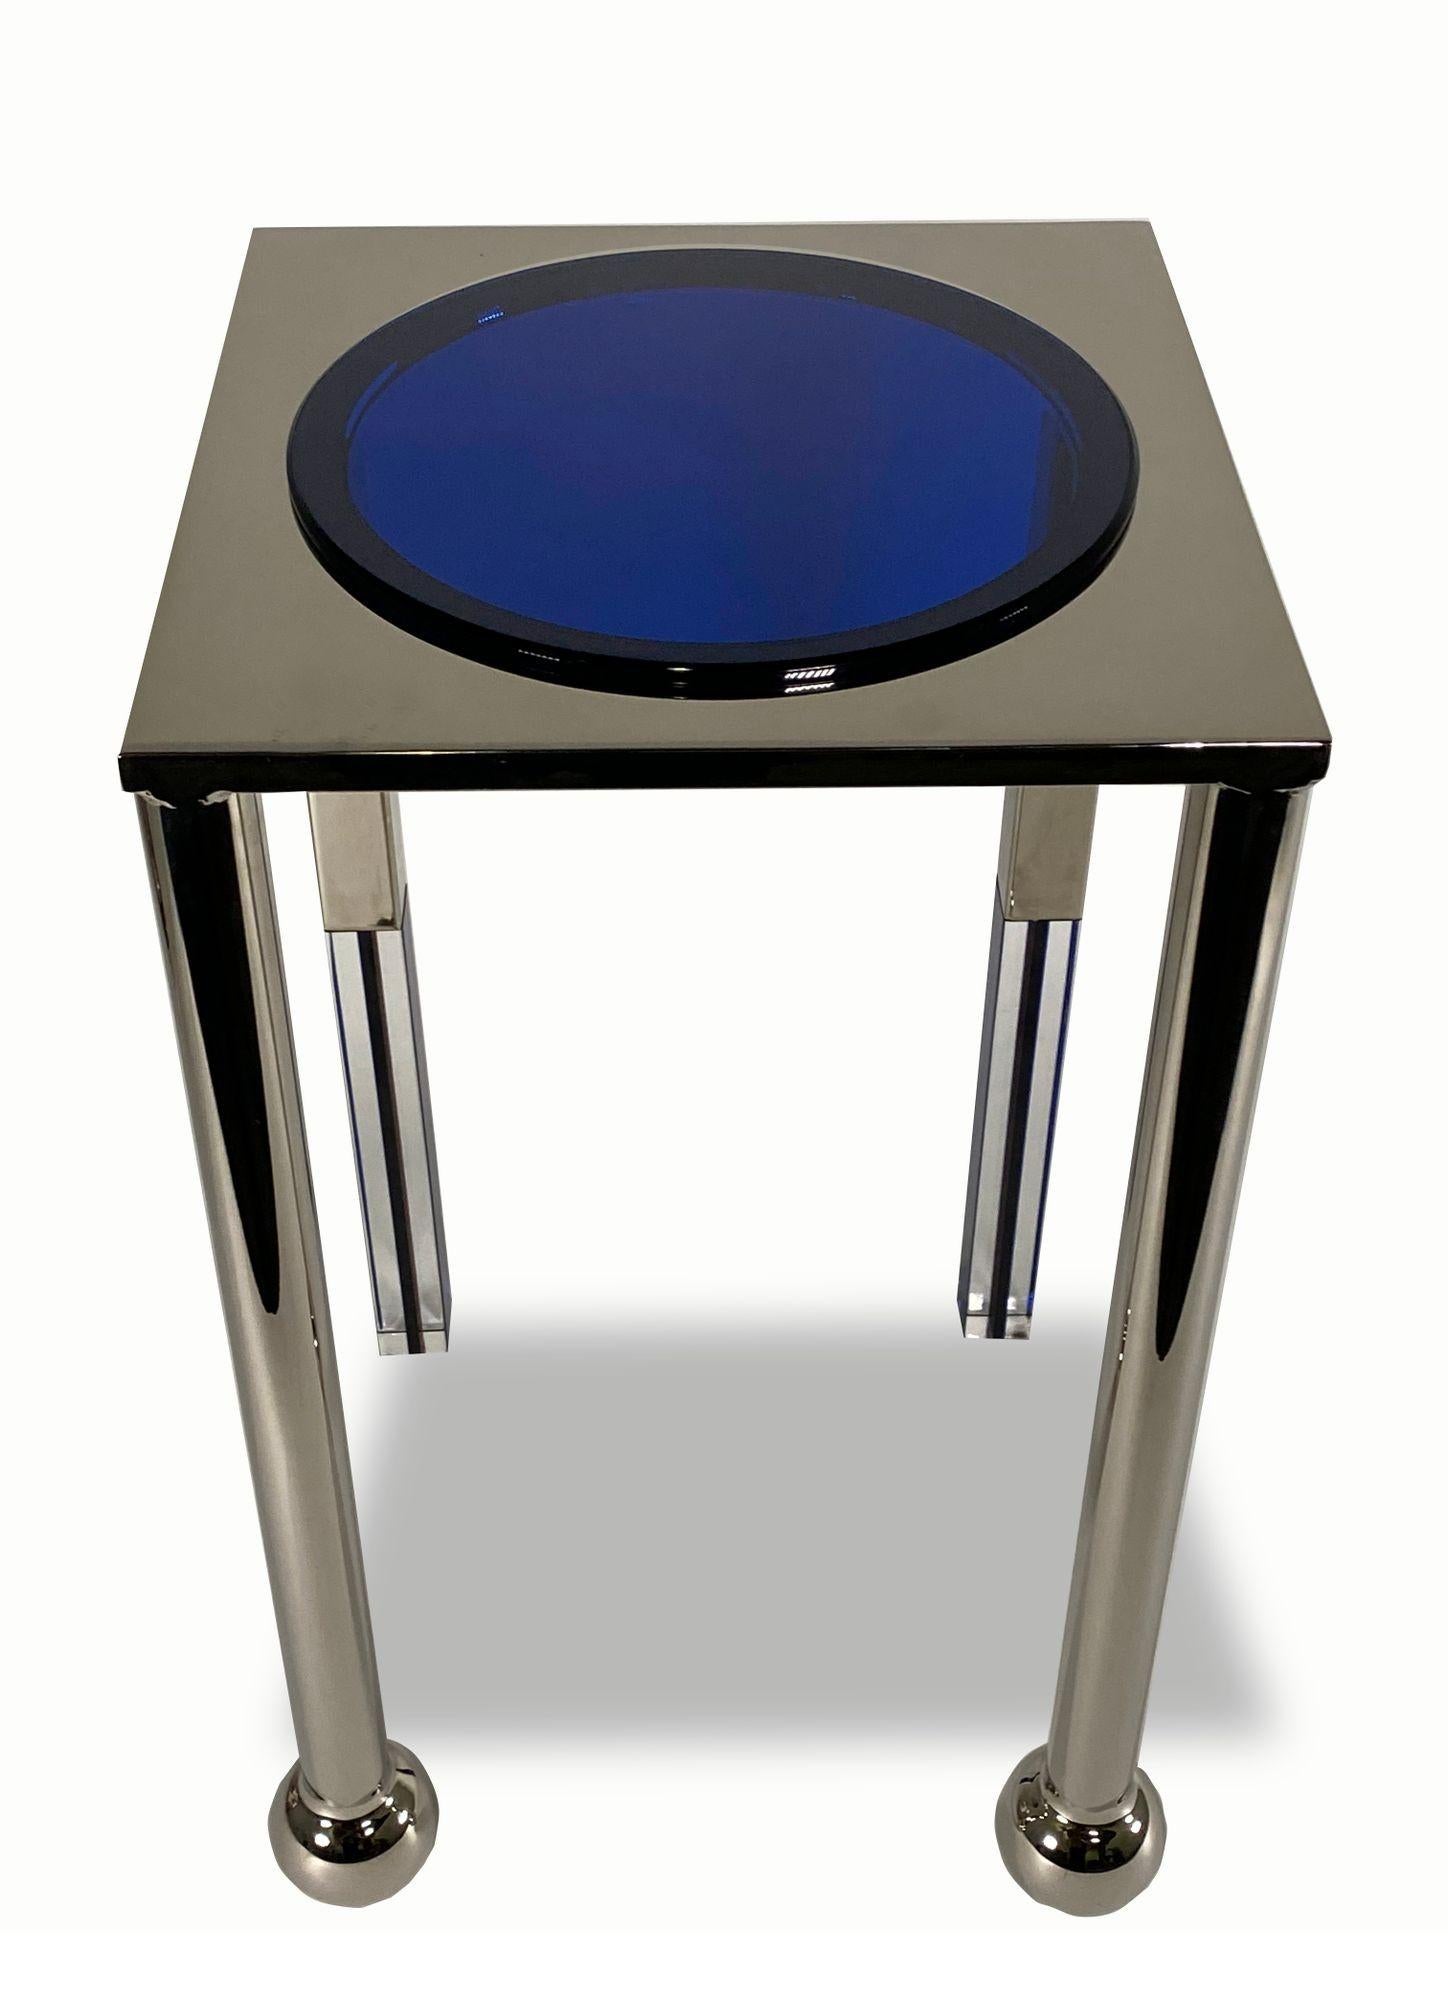 Unique side table design by Charles Hollis Jones.
Finished in polish chrome with a decorative lucite circle top plate in blue. Production is limited to 12 pieces, and is a limited run. Clients can buy one table, or one pair. We are the exclusive